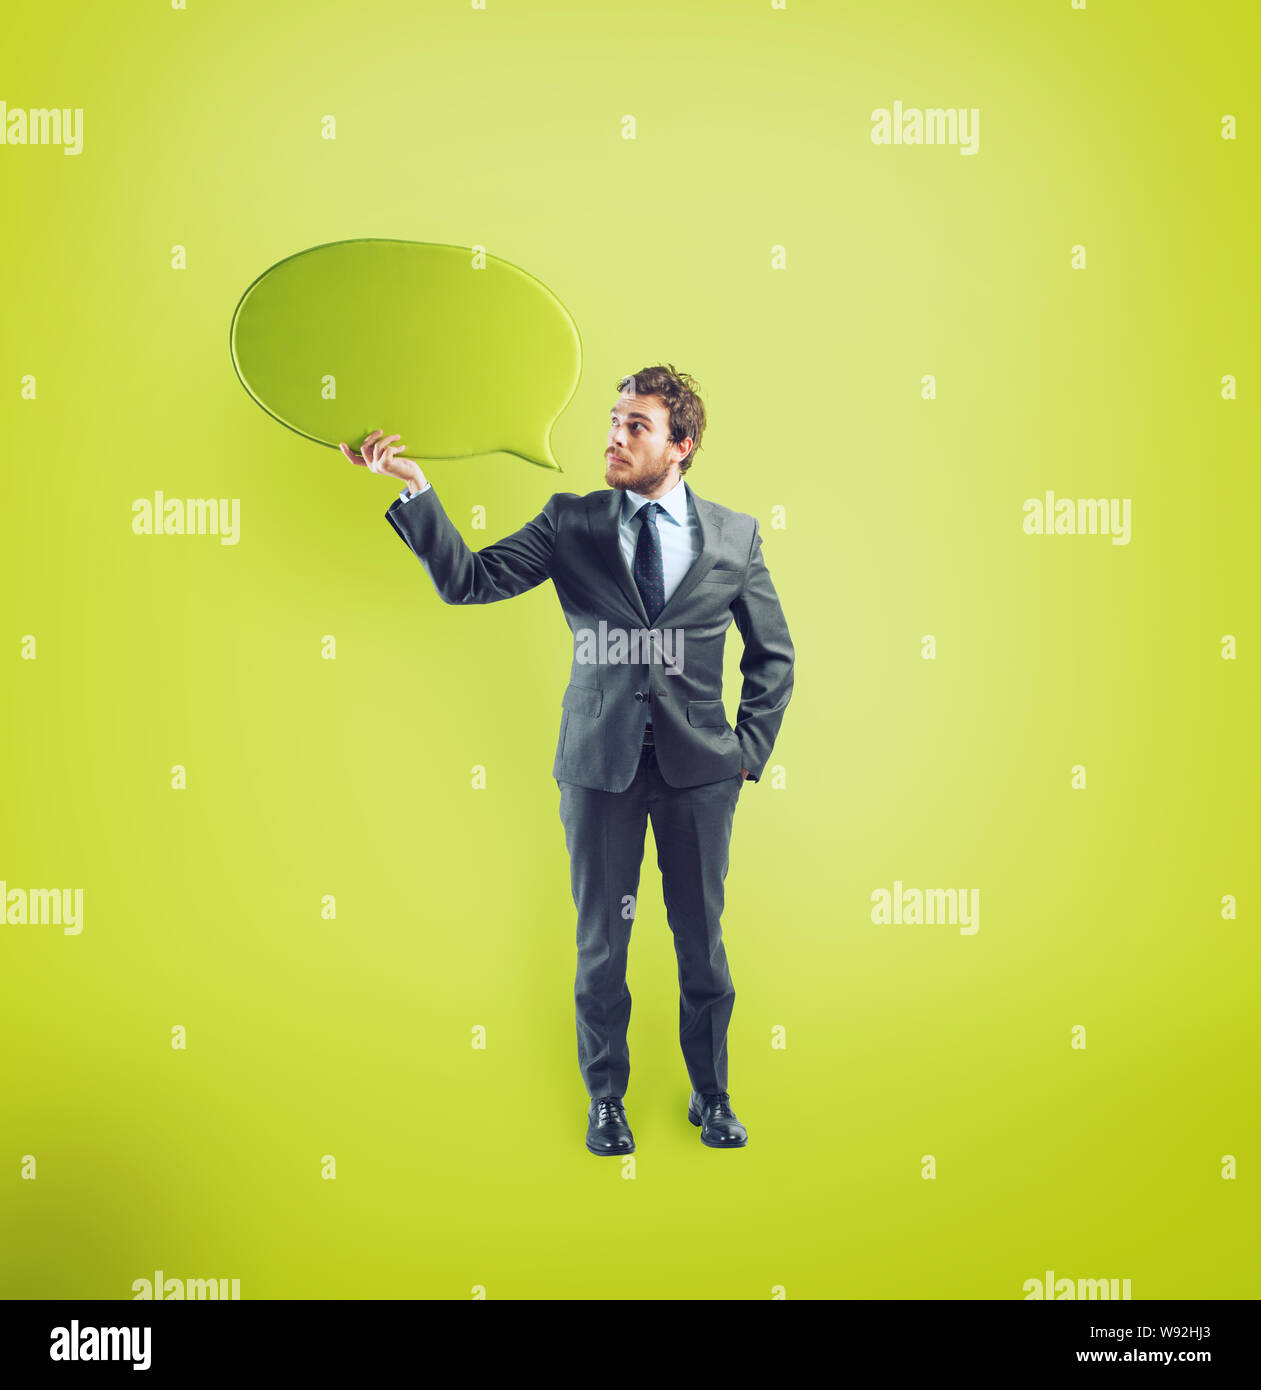 Businessman has something to say in a speech bubble Stock Photo